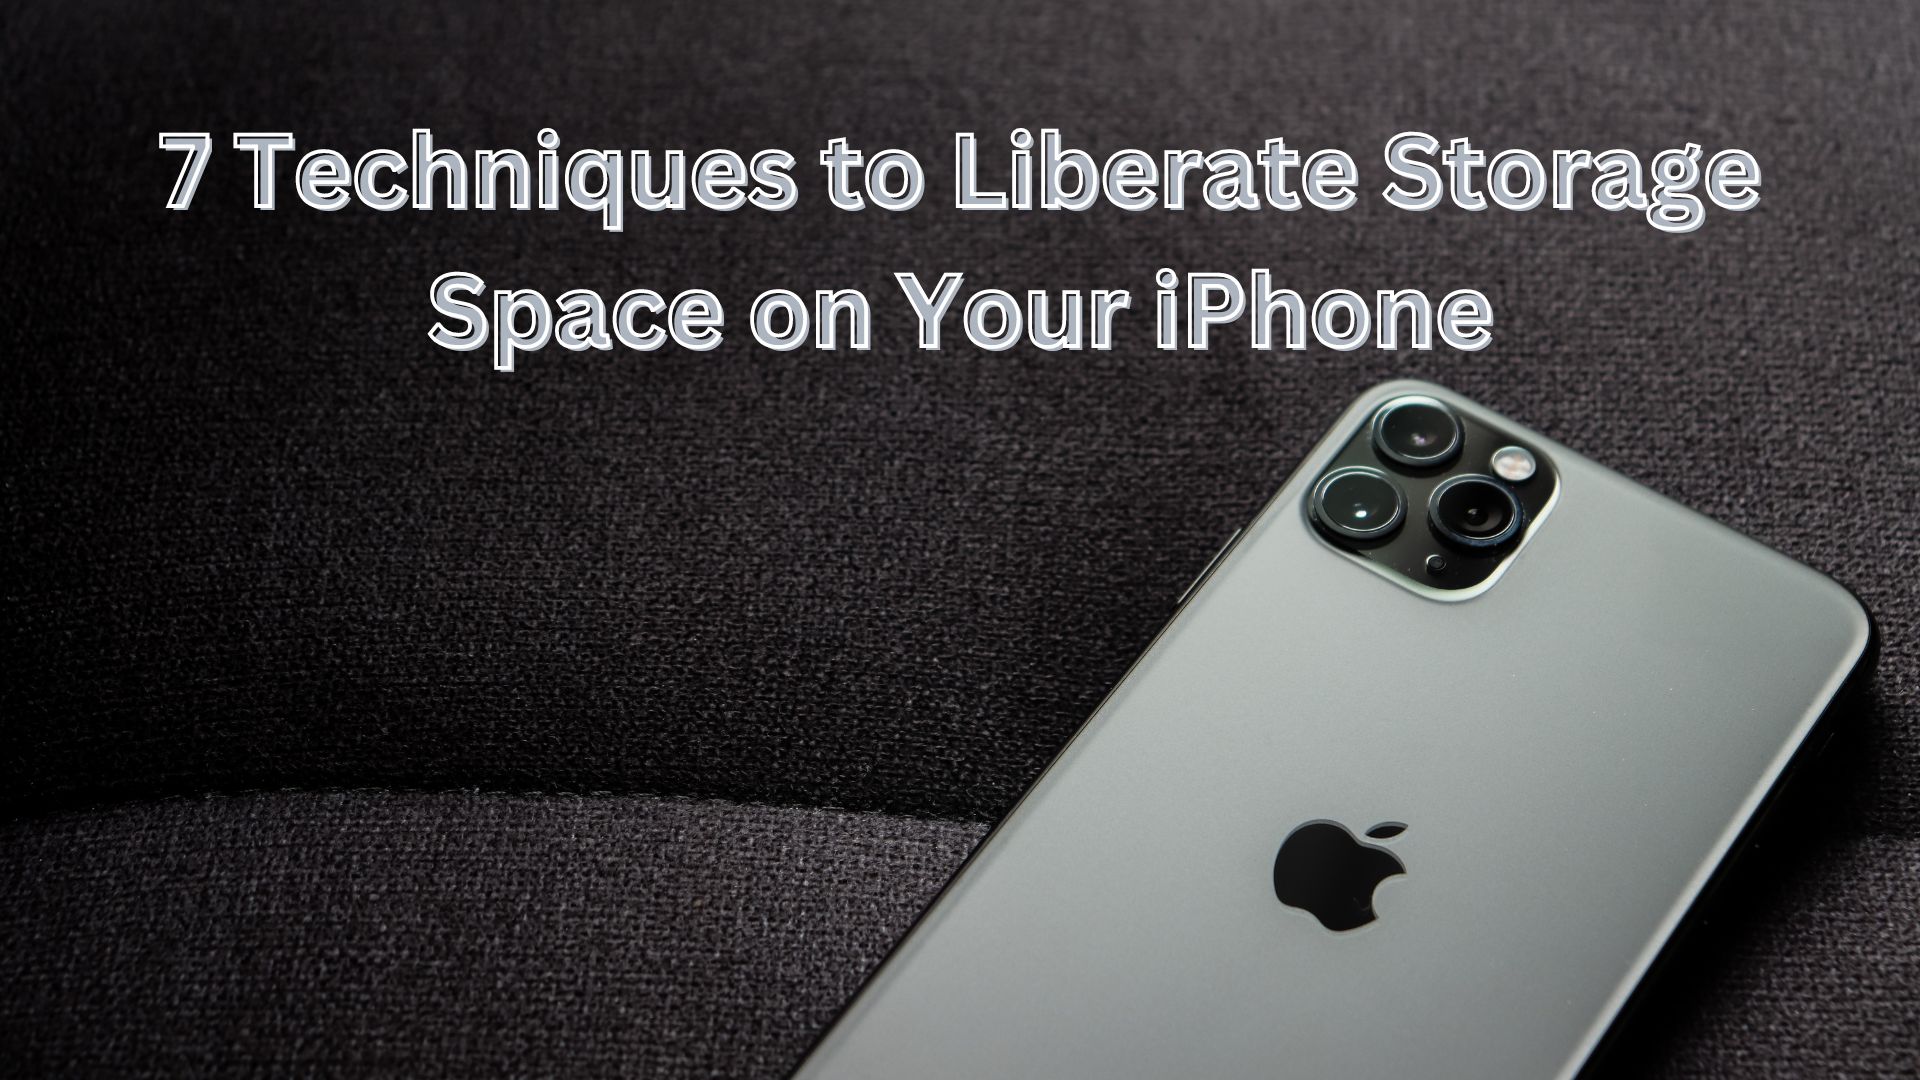 7 Techniques to Liberate Storage Space on Your iPhone